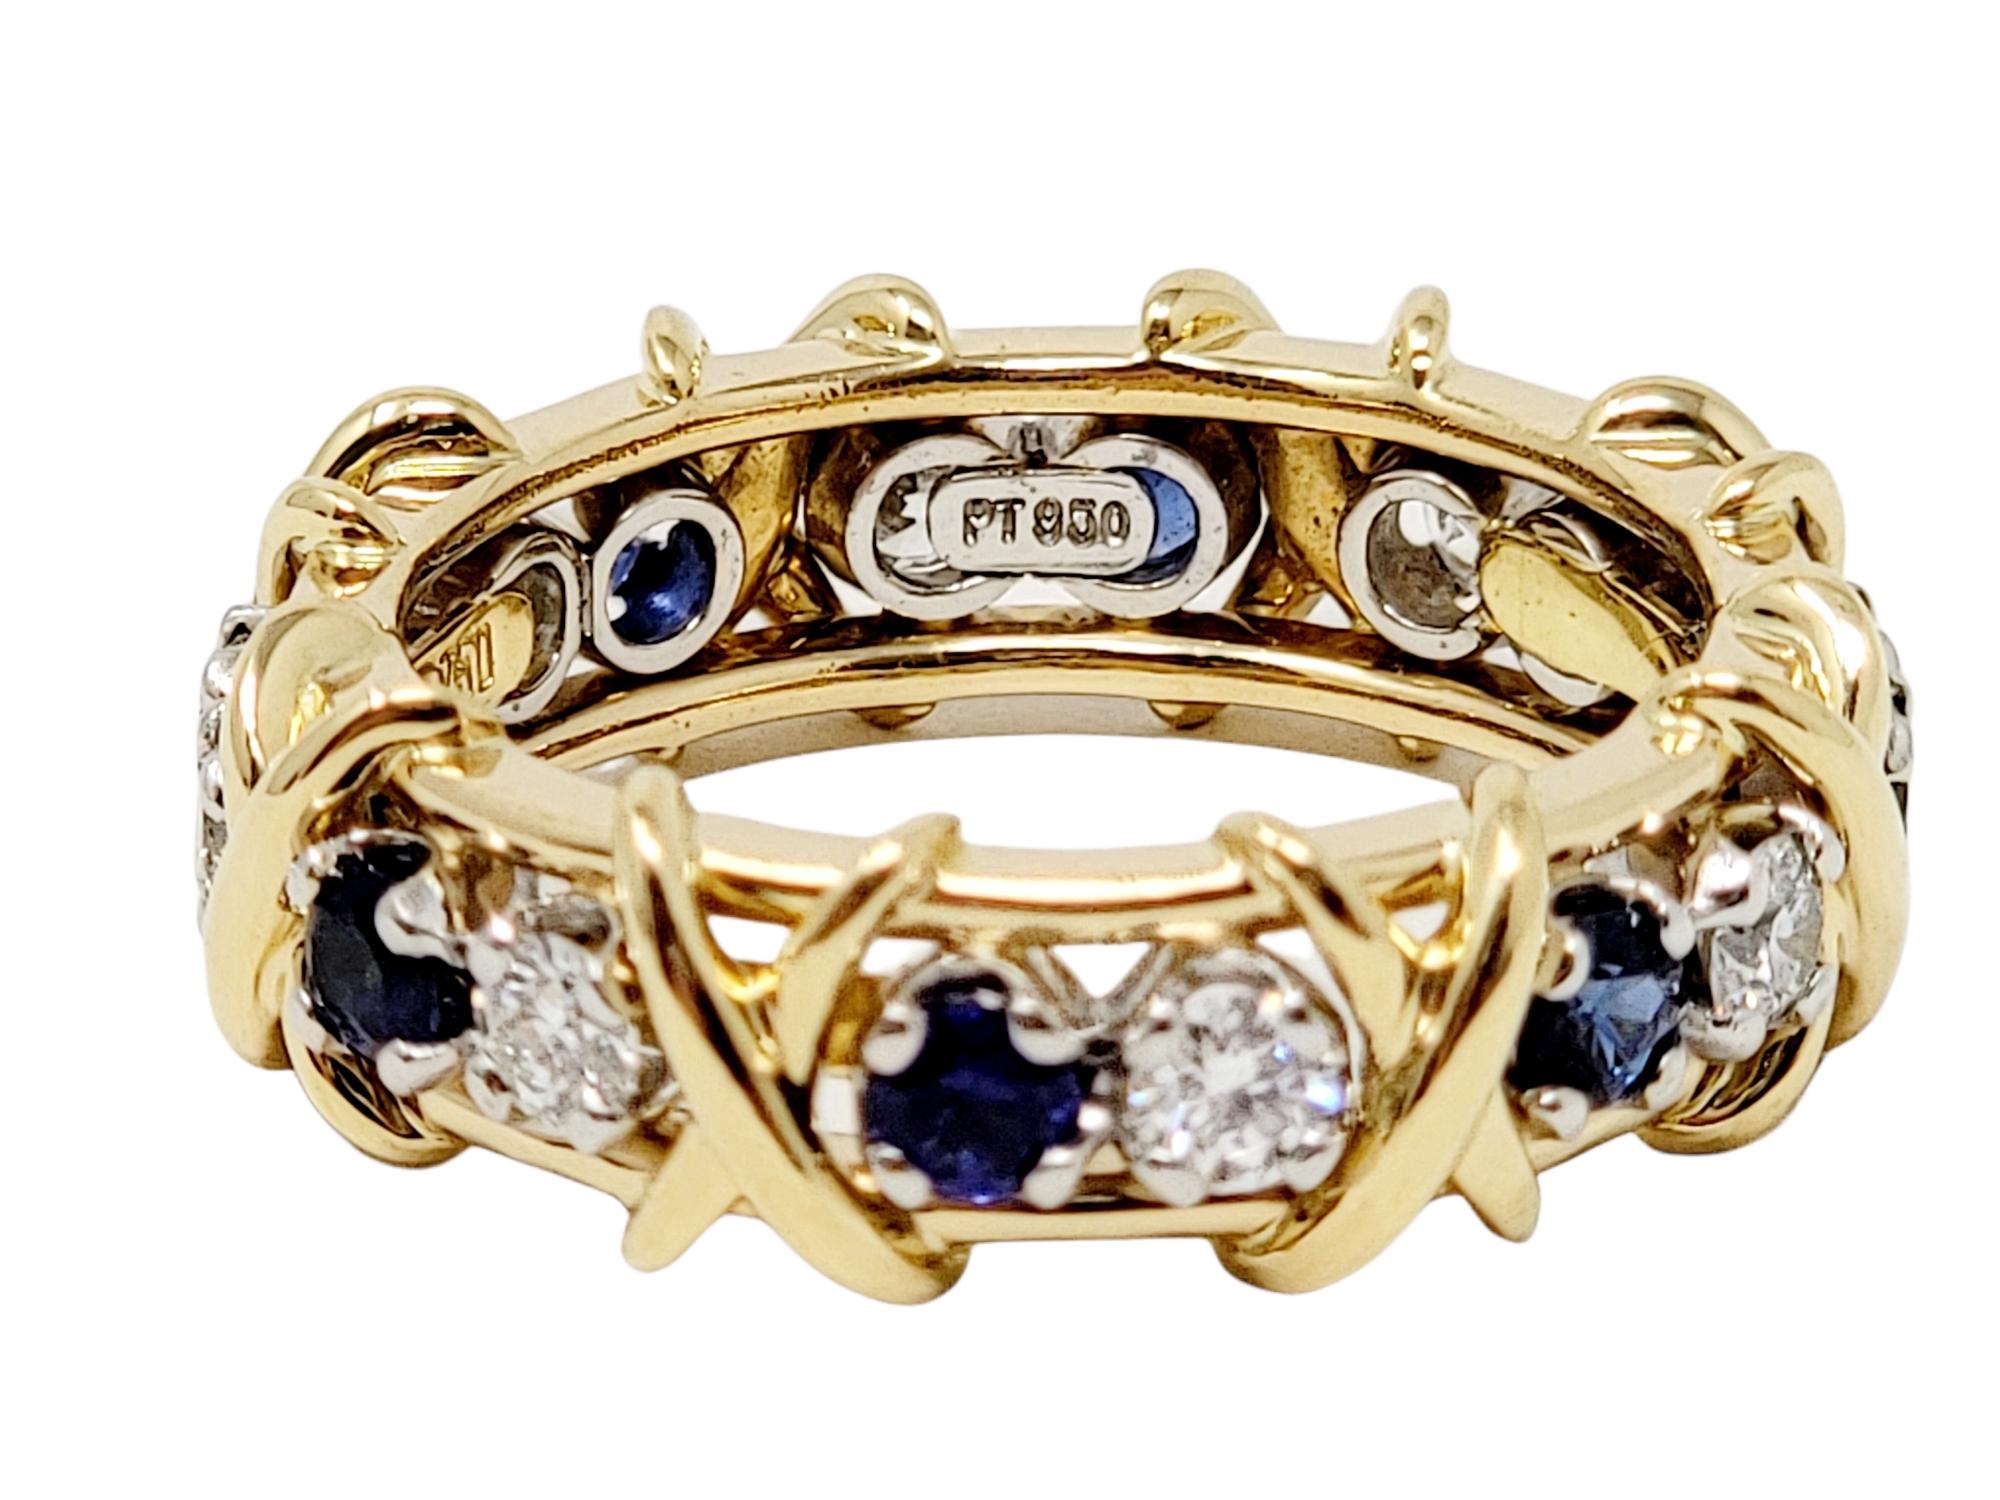 Jean Schlumberger for Tiffany & Co. Diamond and Sapphire Sixteen-Stone 4